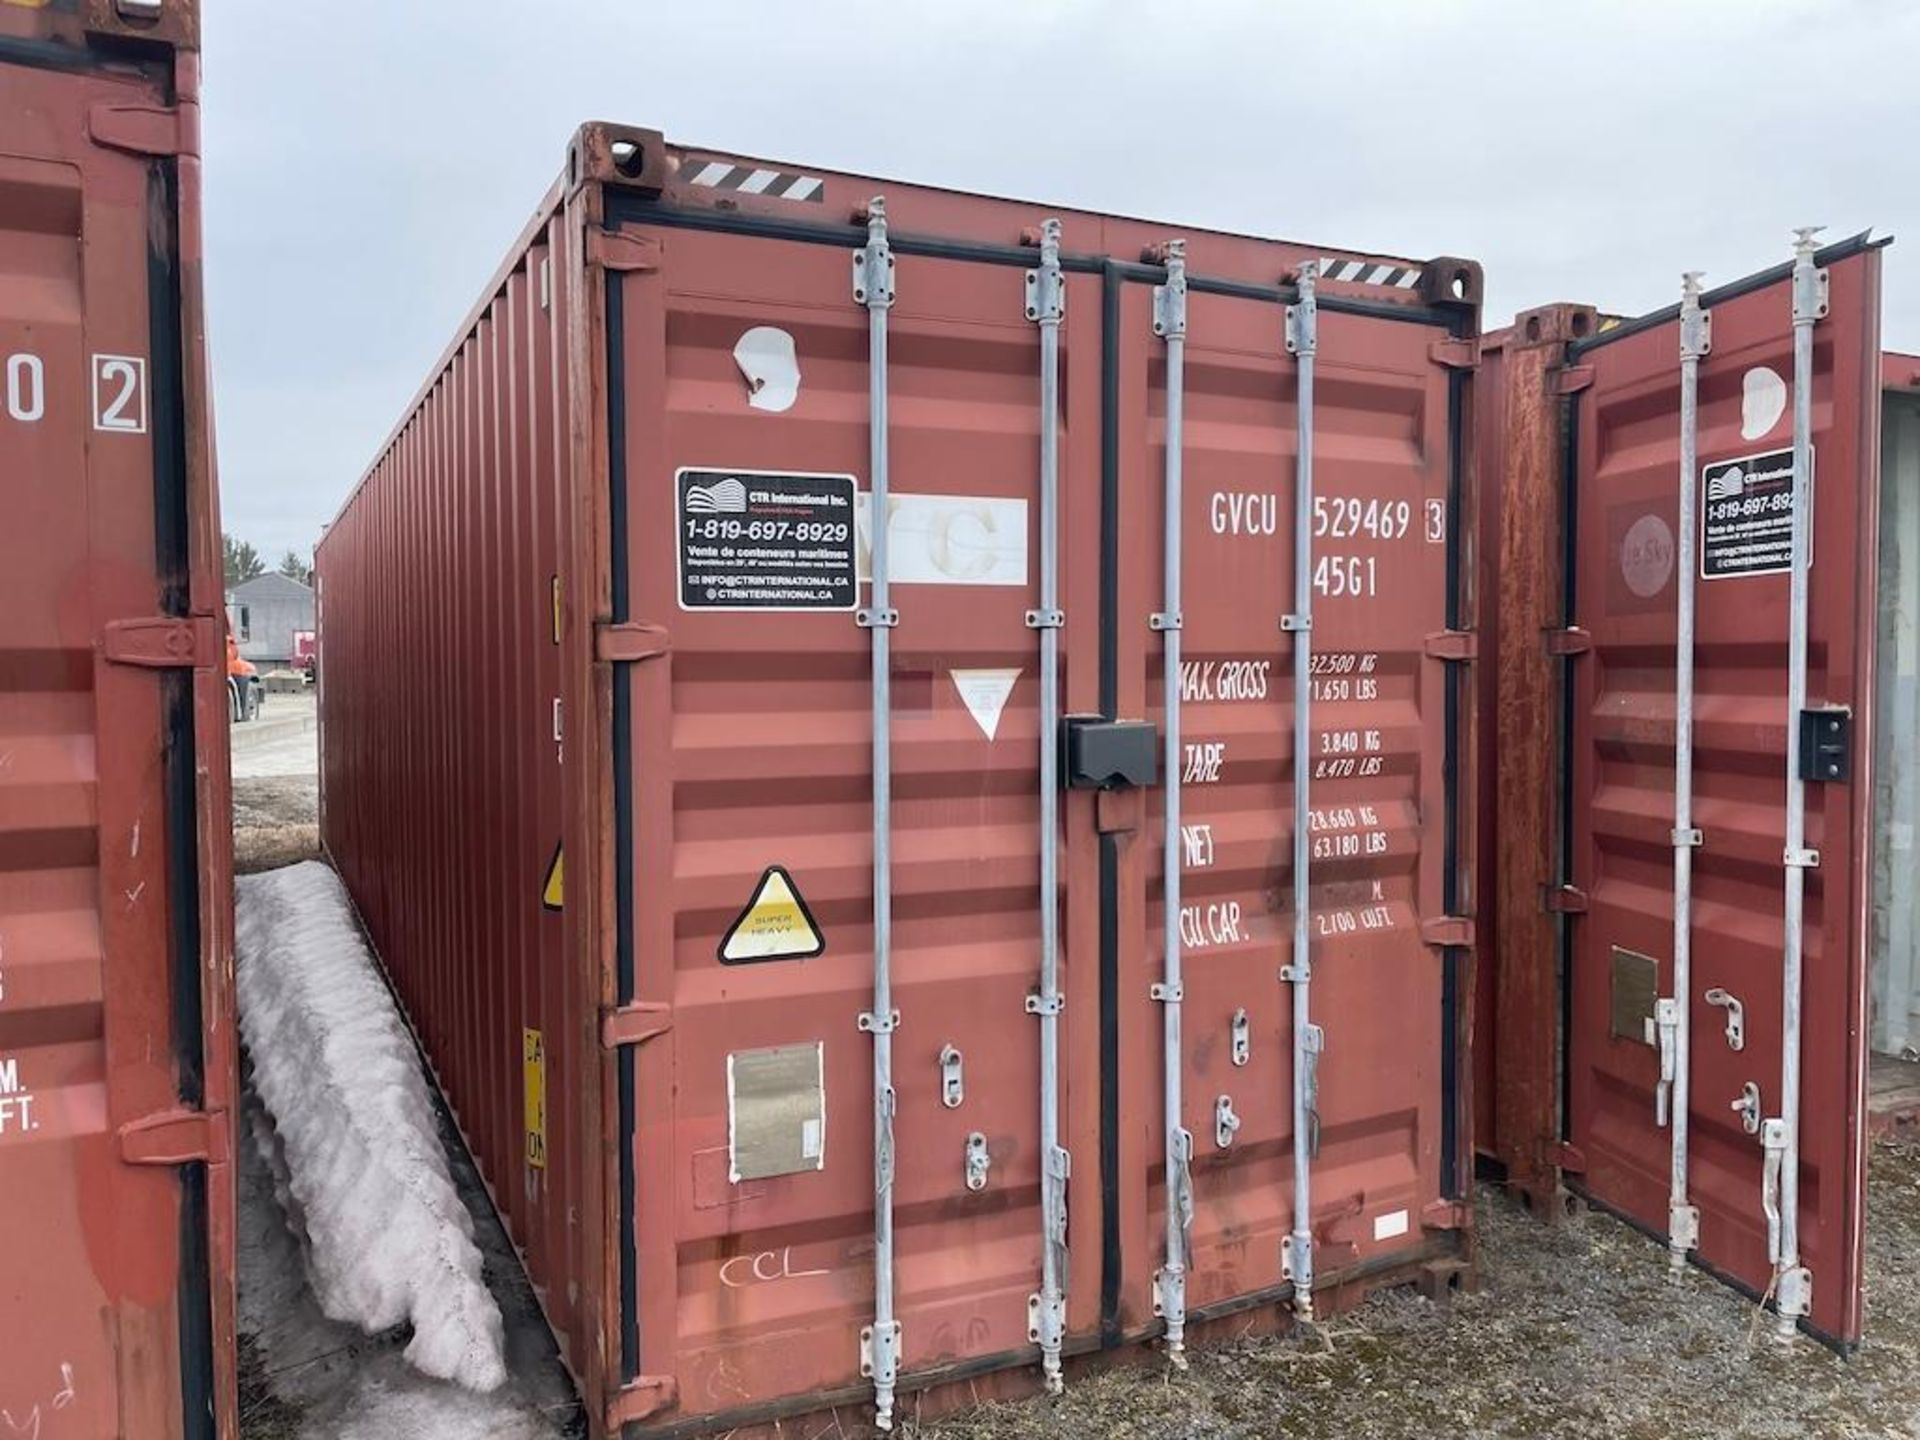 40 FT SEA CONTAINER, EXCLUDING CONTENTS, DELAYED PICK UP UNTIL MAY 13 [11] [TROIS RIVIERES] *PLEASE